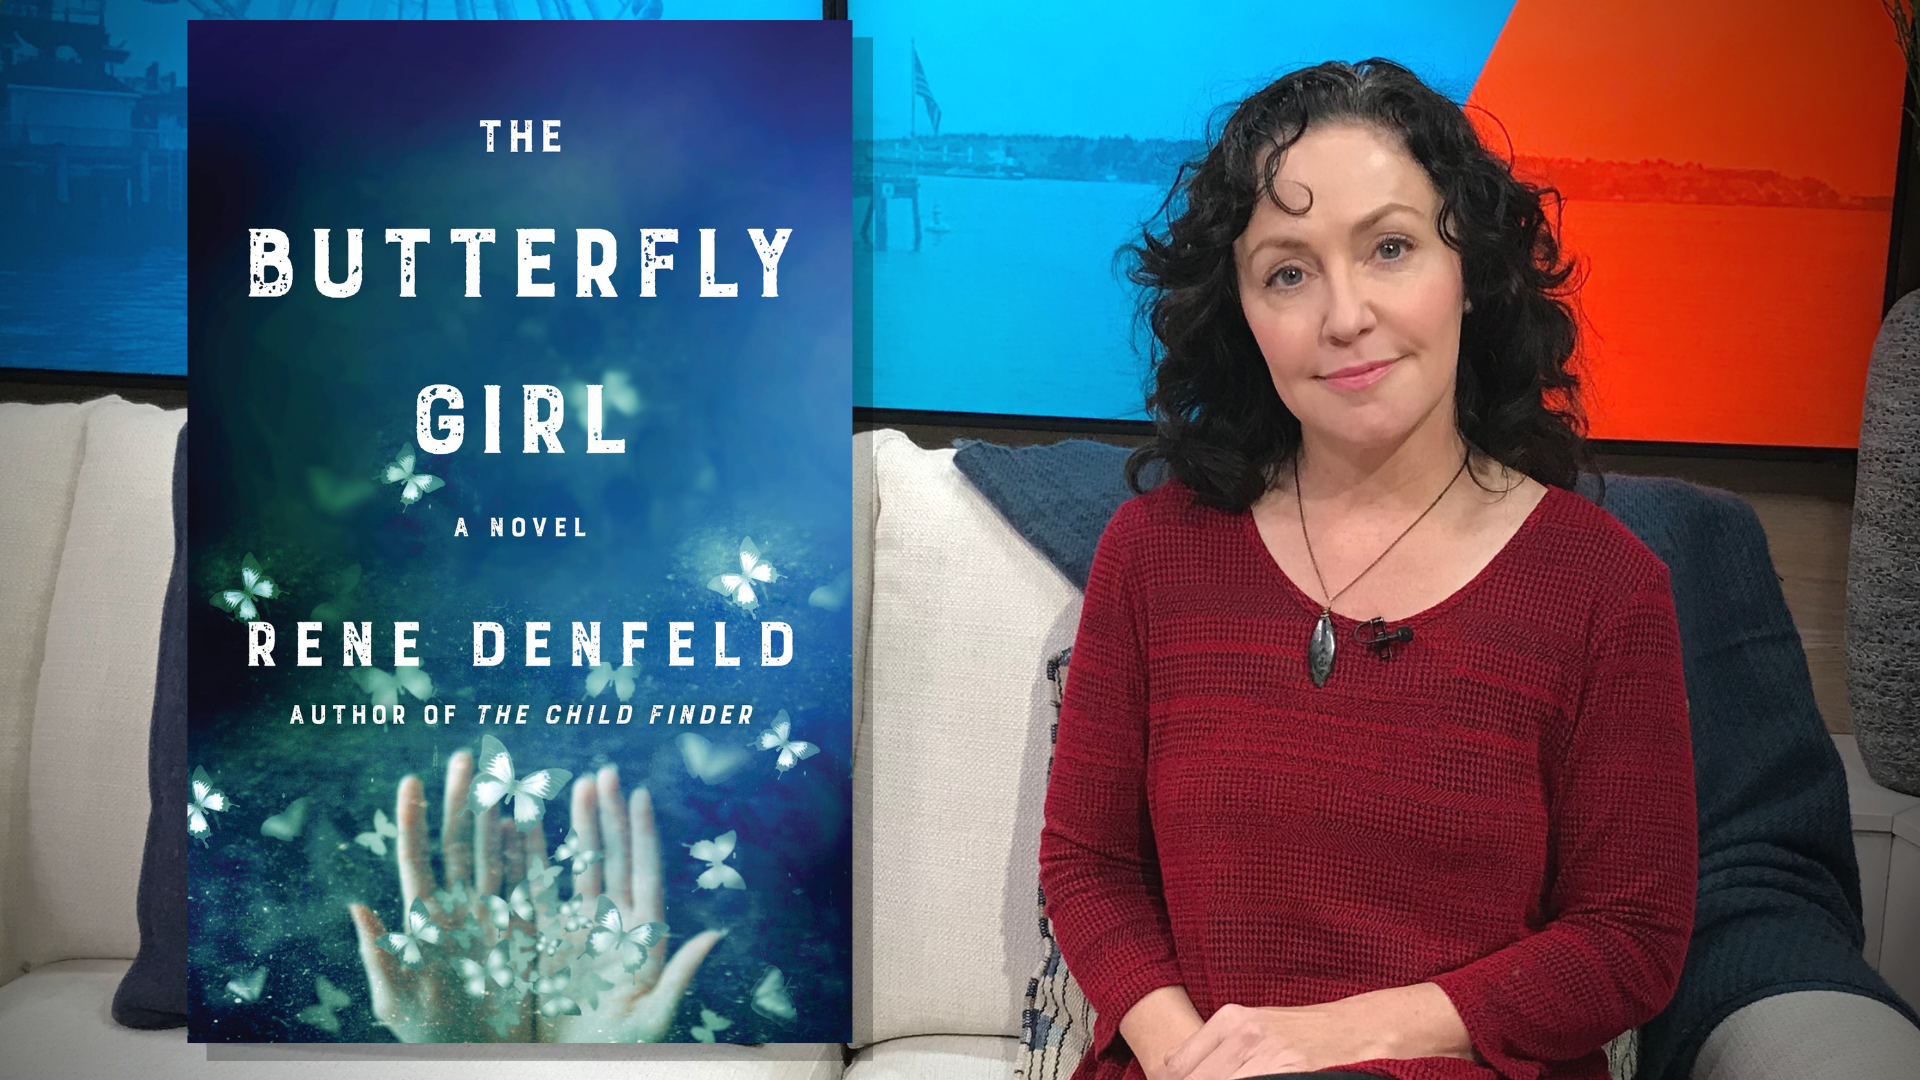 Rene Denfeld's "The Butterfly Girl" is loosely based on her experiences with homelessness and a near-miss with the Green River Killer